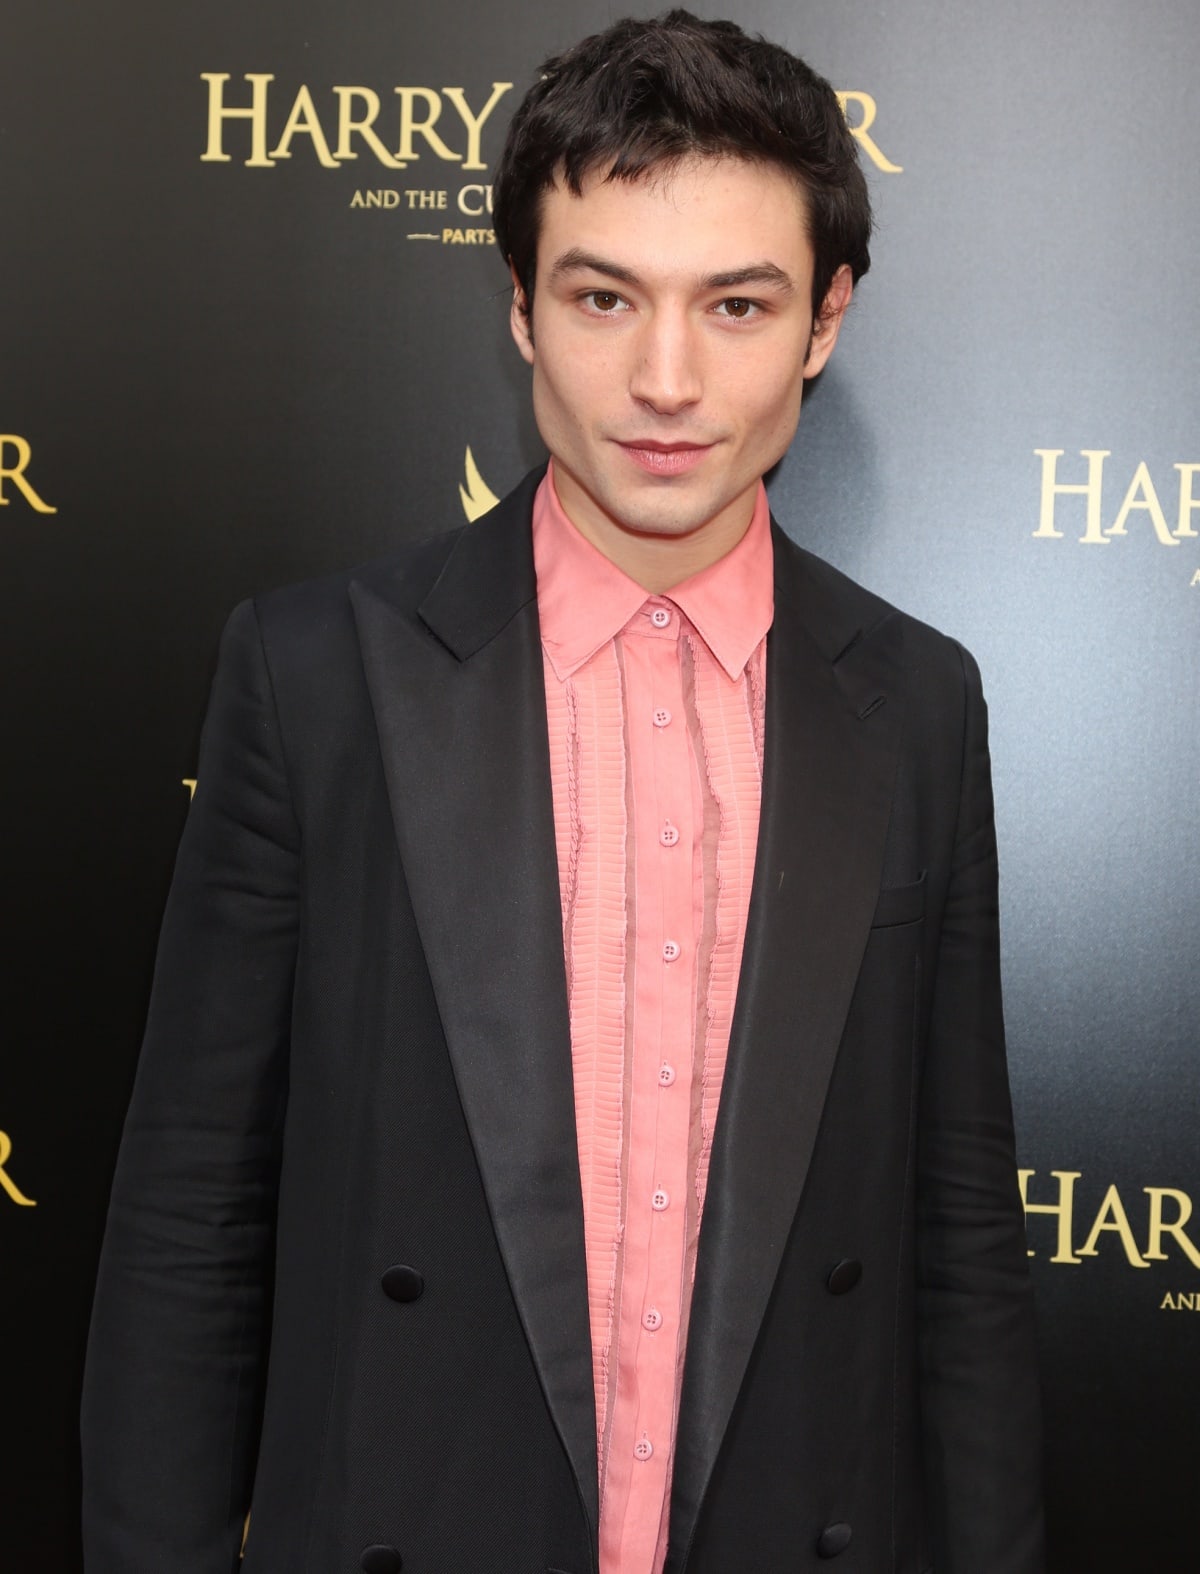 Ezra Miller arriving during opening day of Harry Potter and the Cursed Child